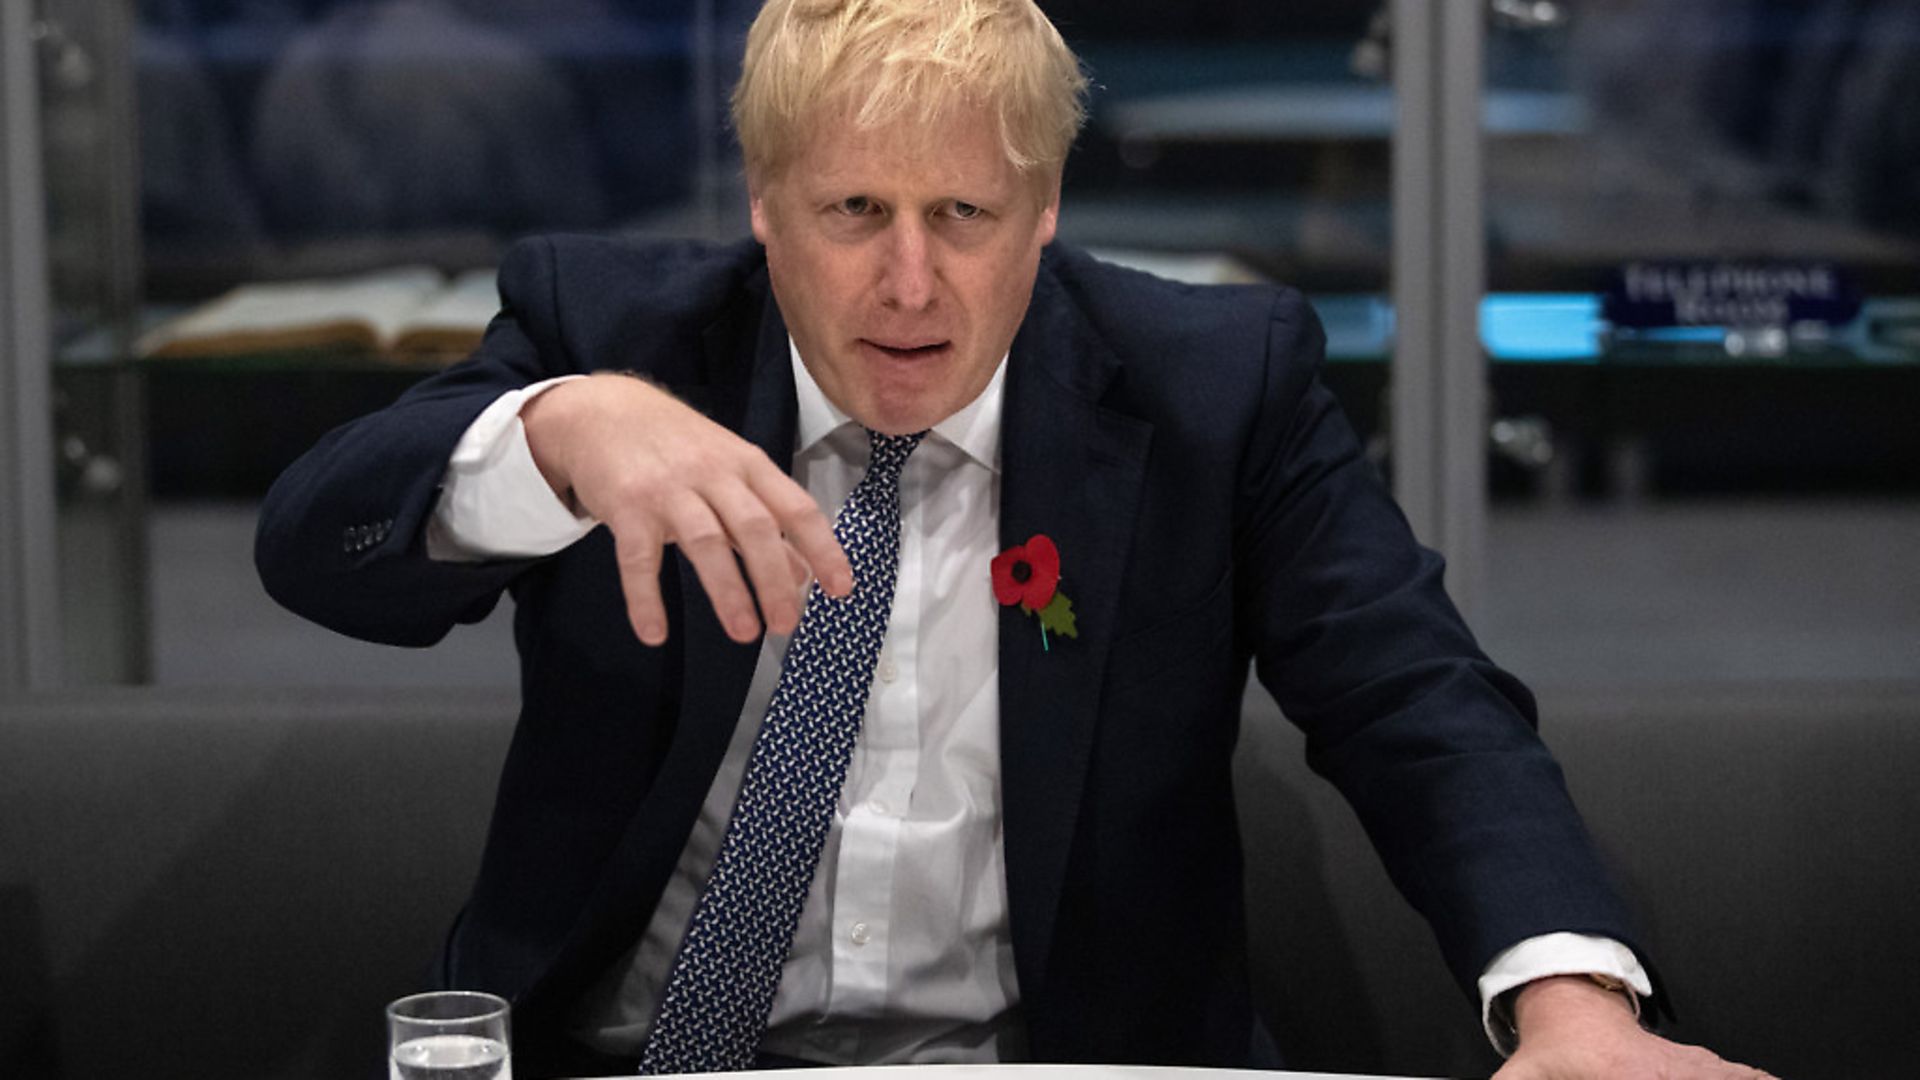 Boris Johnson during a visit to Metropolitan Police training college. Photograph: Aaron Chown/PA - Credit: PA Wire/PA Images